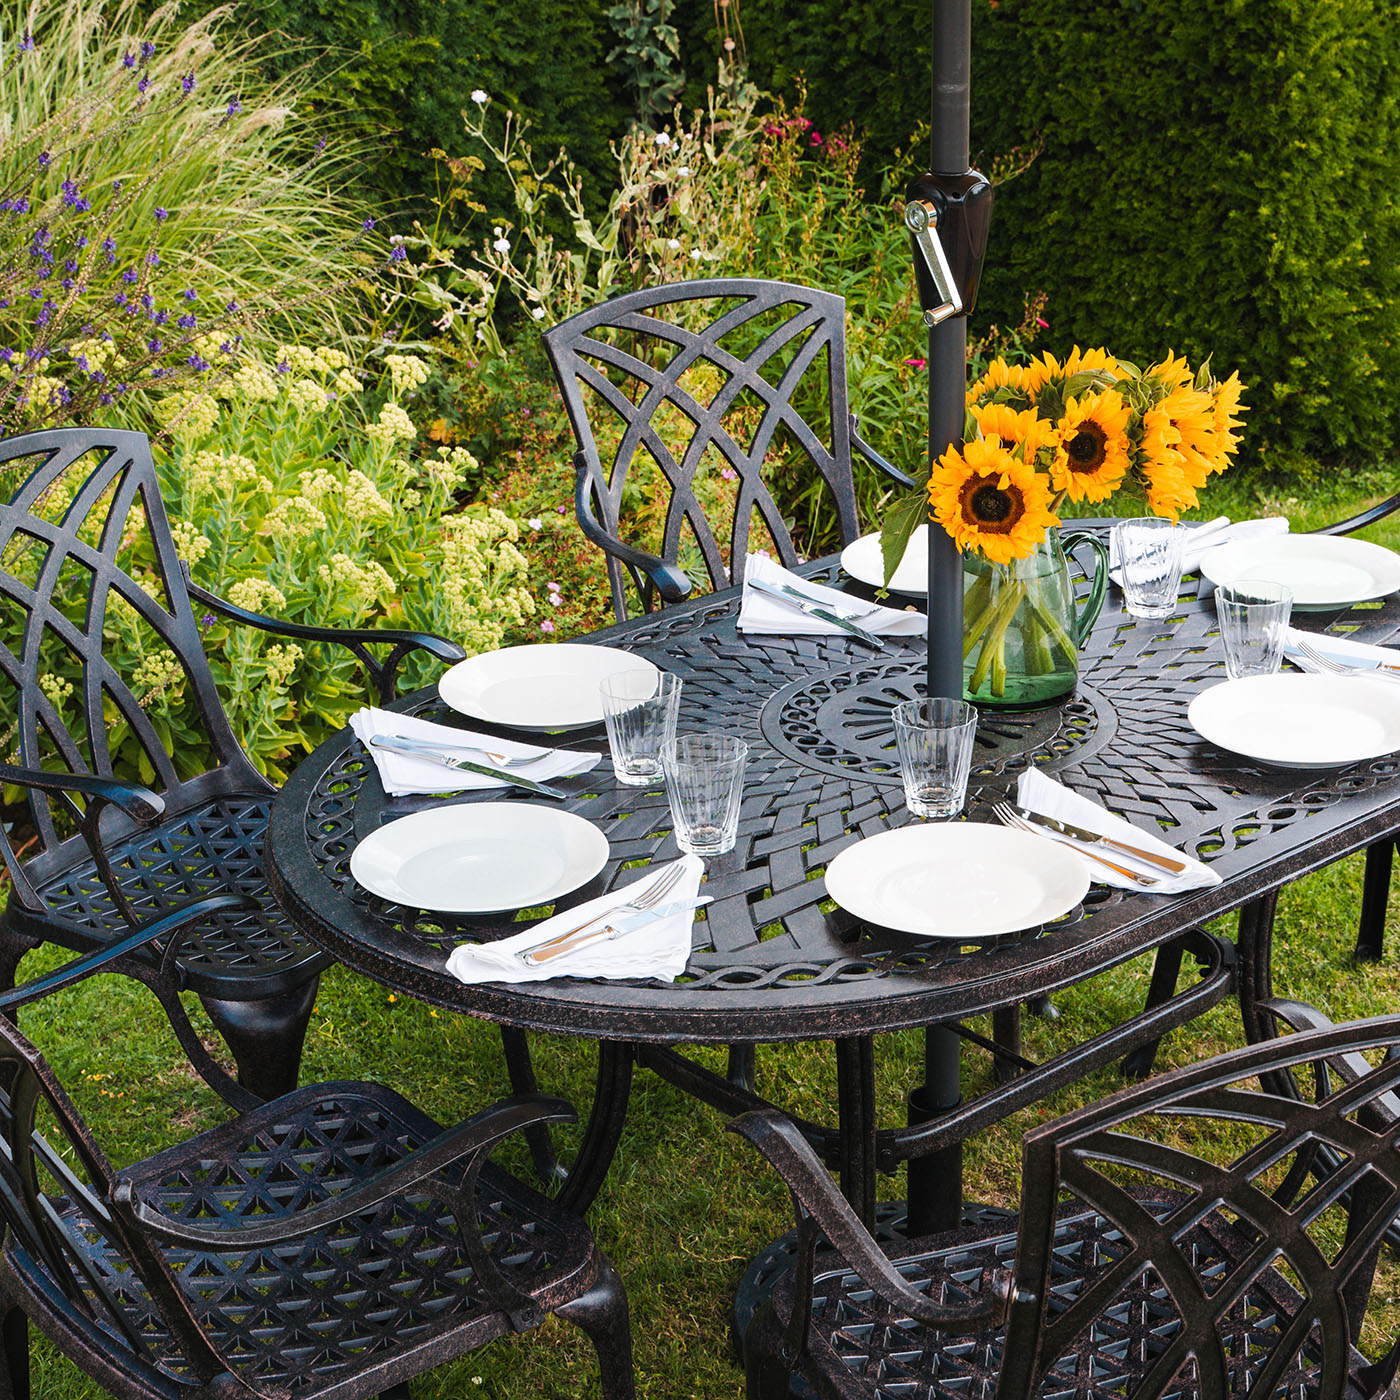 6-seater garden furniture sets from Lazy Susan